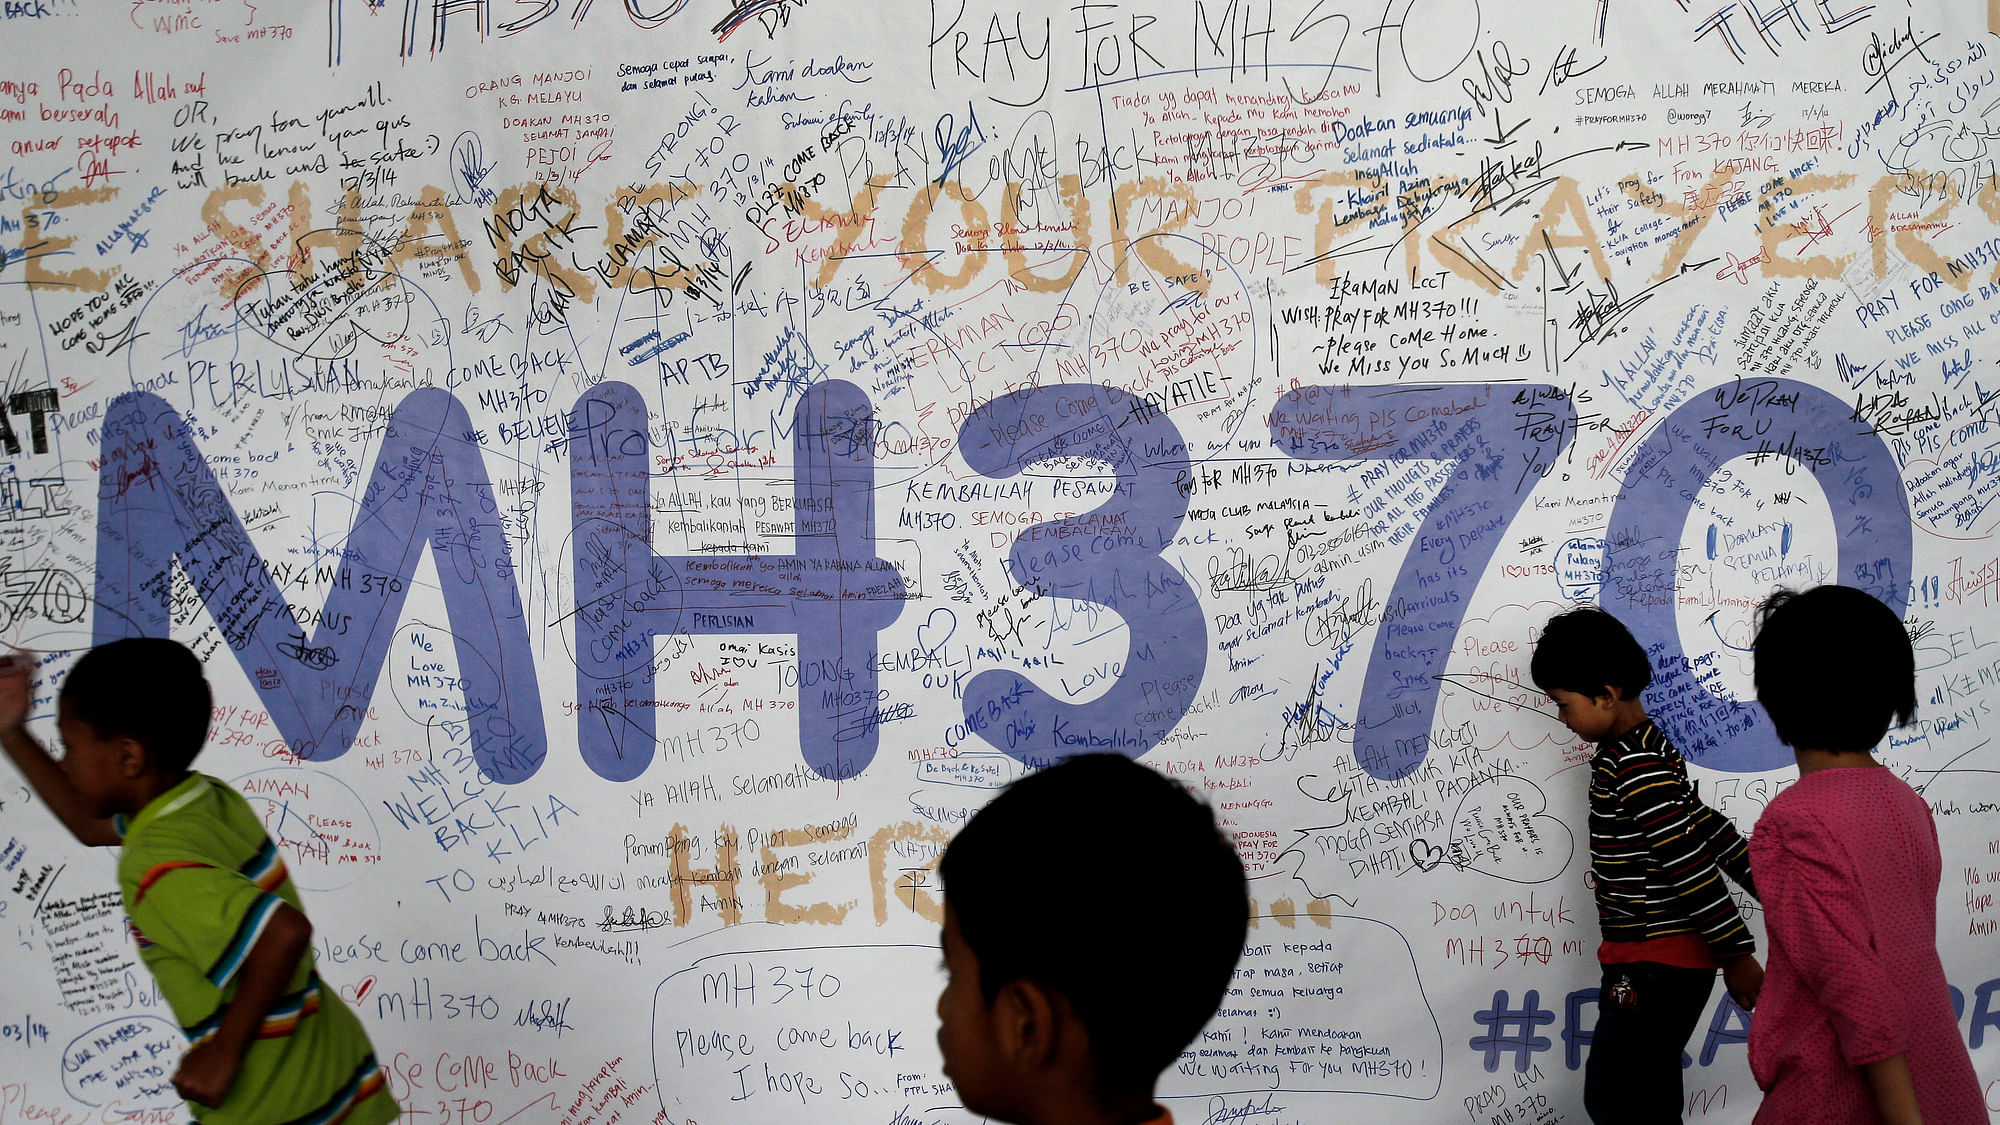 Malaysia Airlines flight MH370 vanished in 2014 with 239 people on board. (Photo: AP)